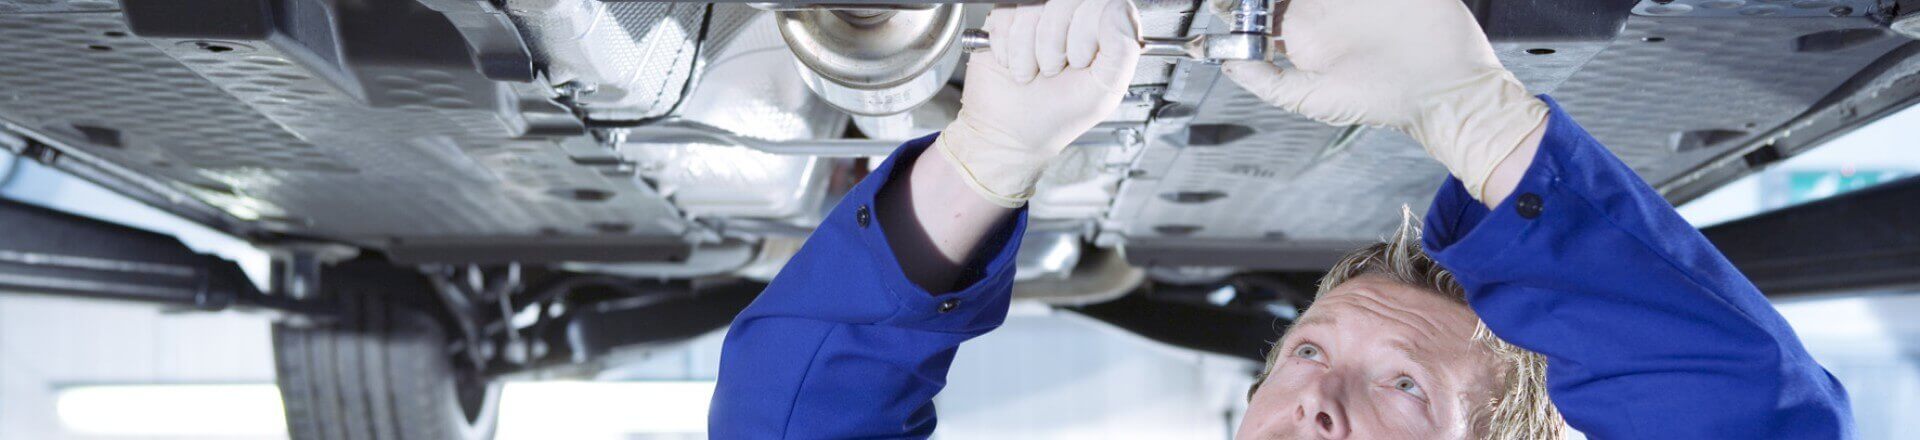 Becoming an MOT Tester (Authorised Examiner)